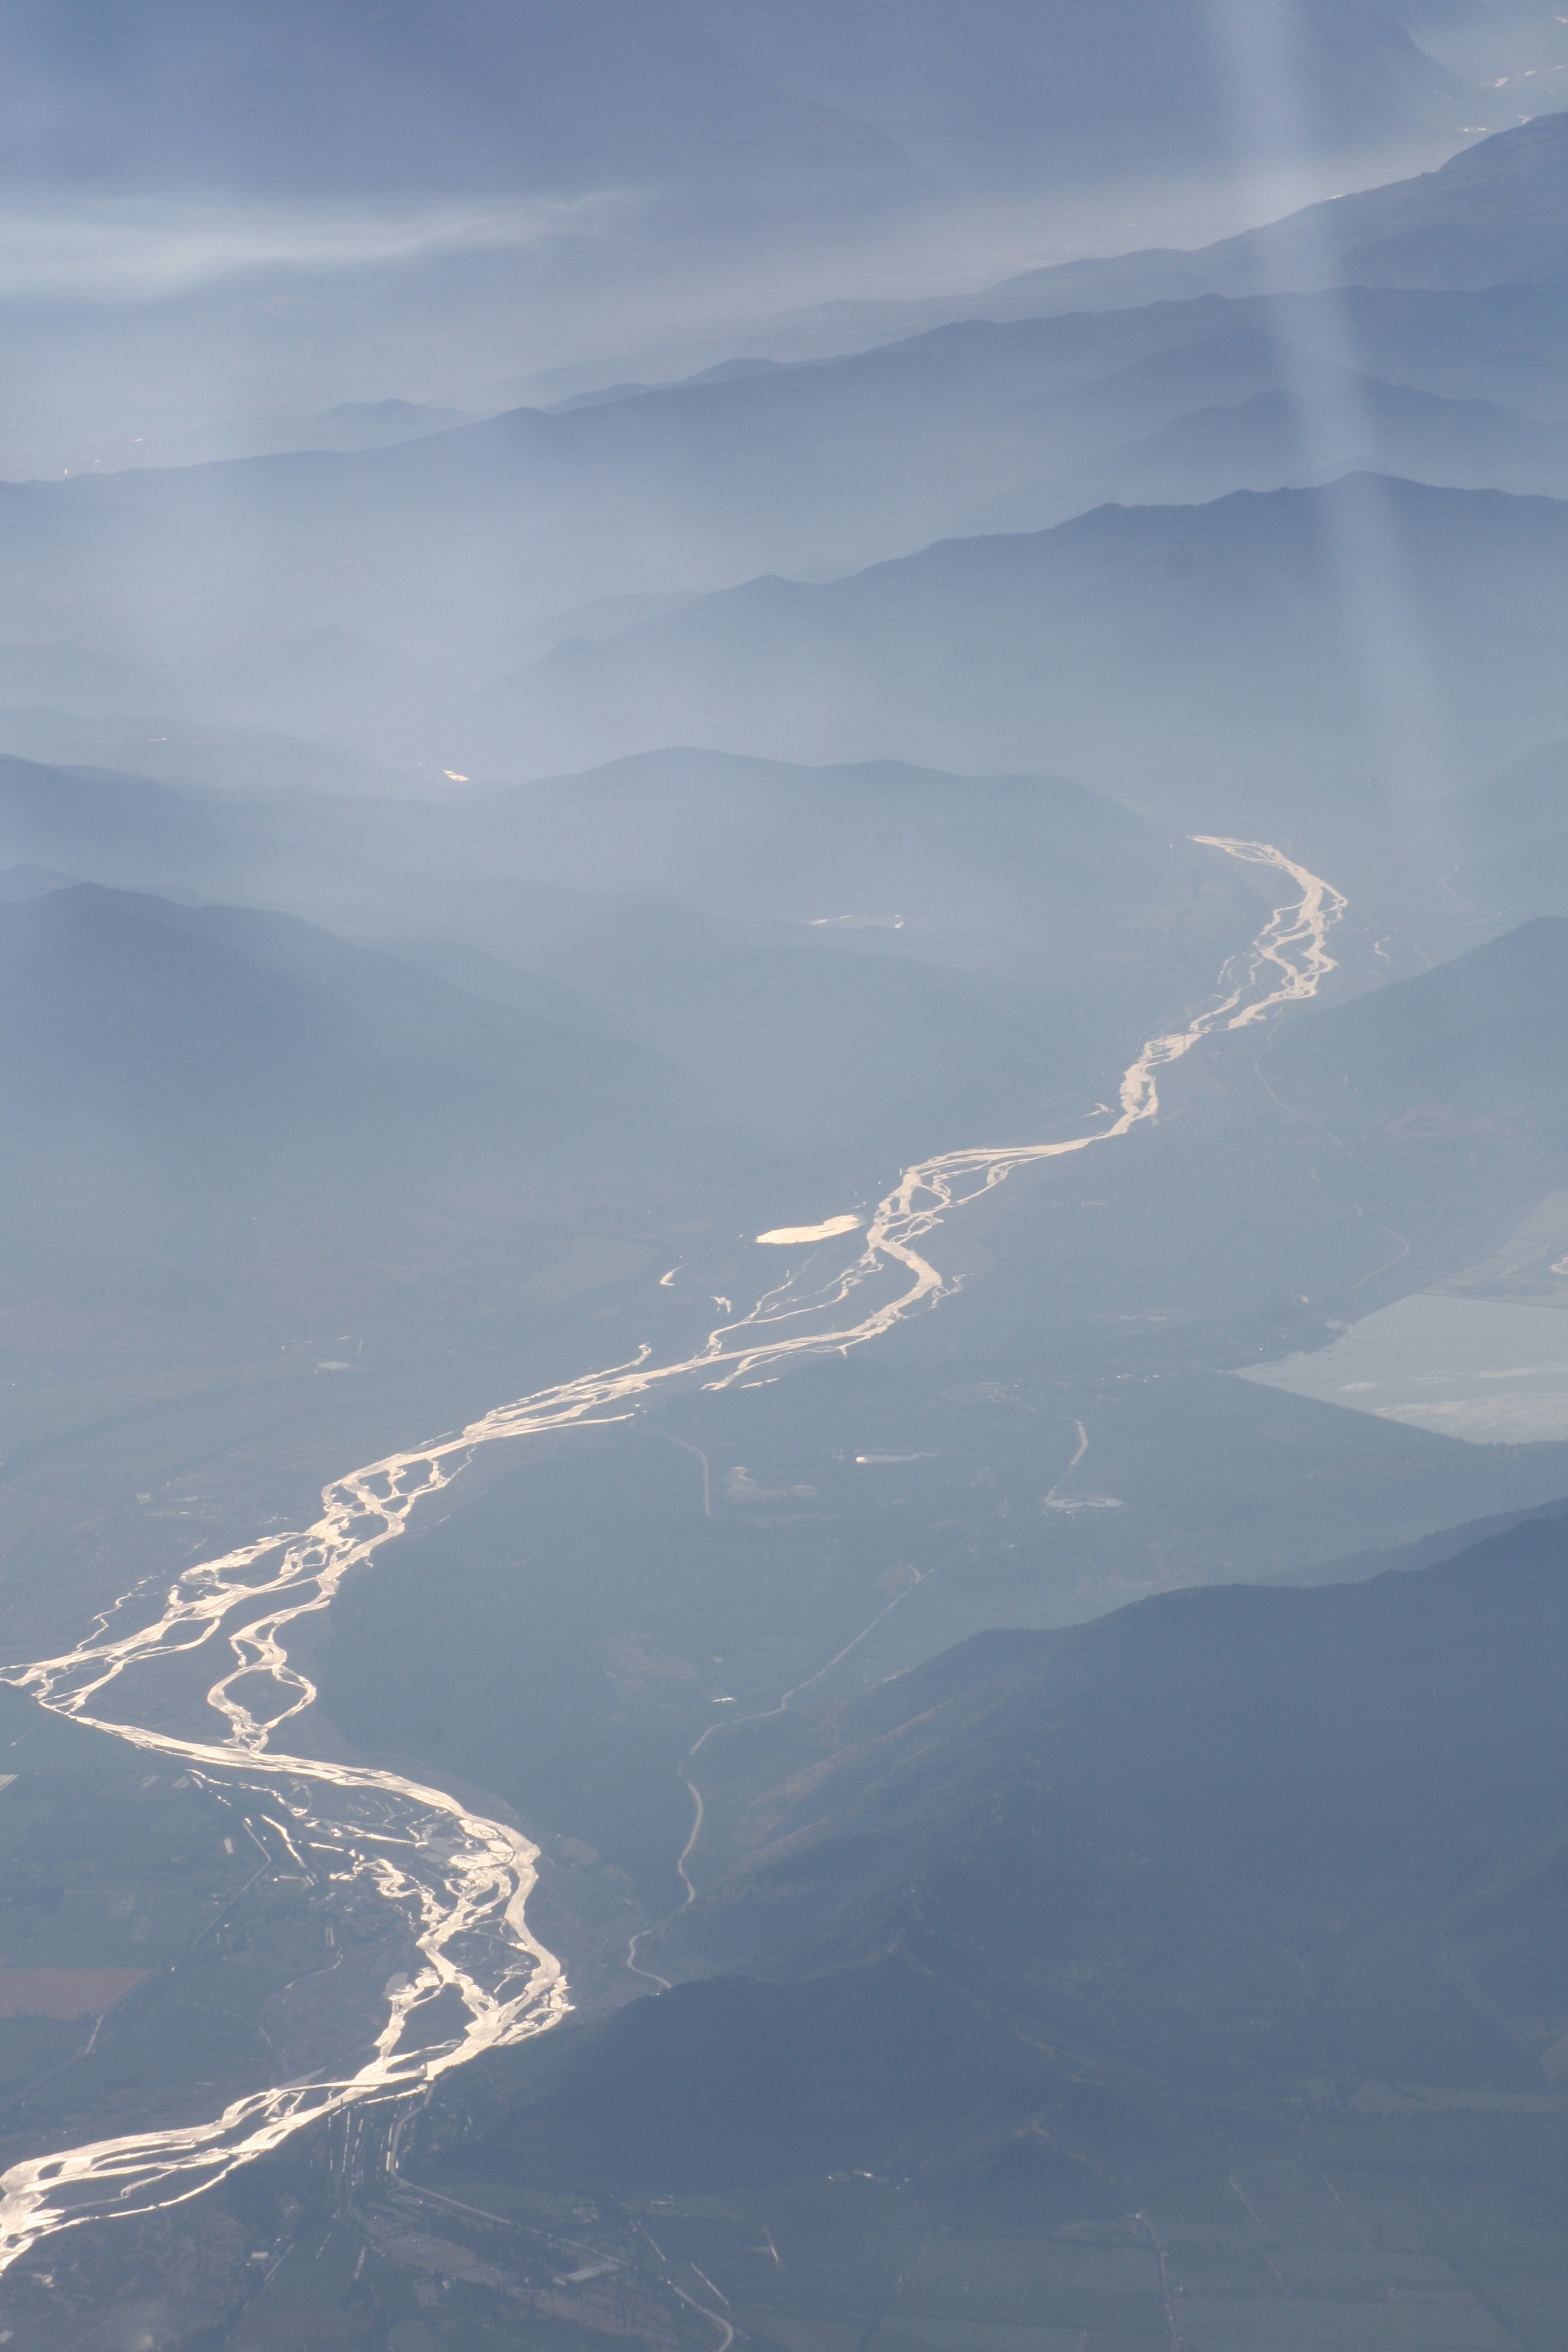 The river Cachapoal runs out of the Andes mountains, past the city of Rancagua